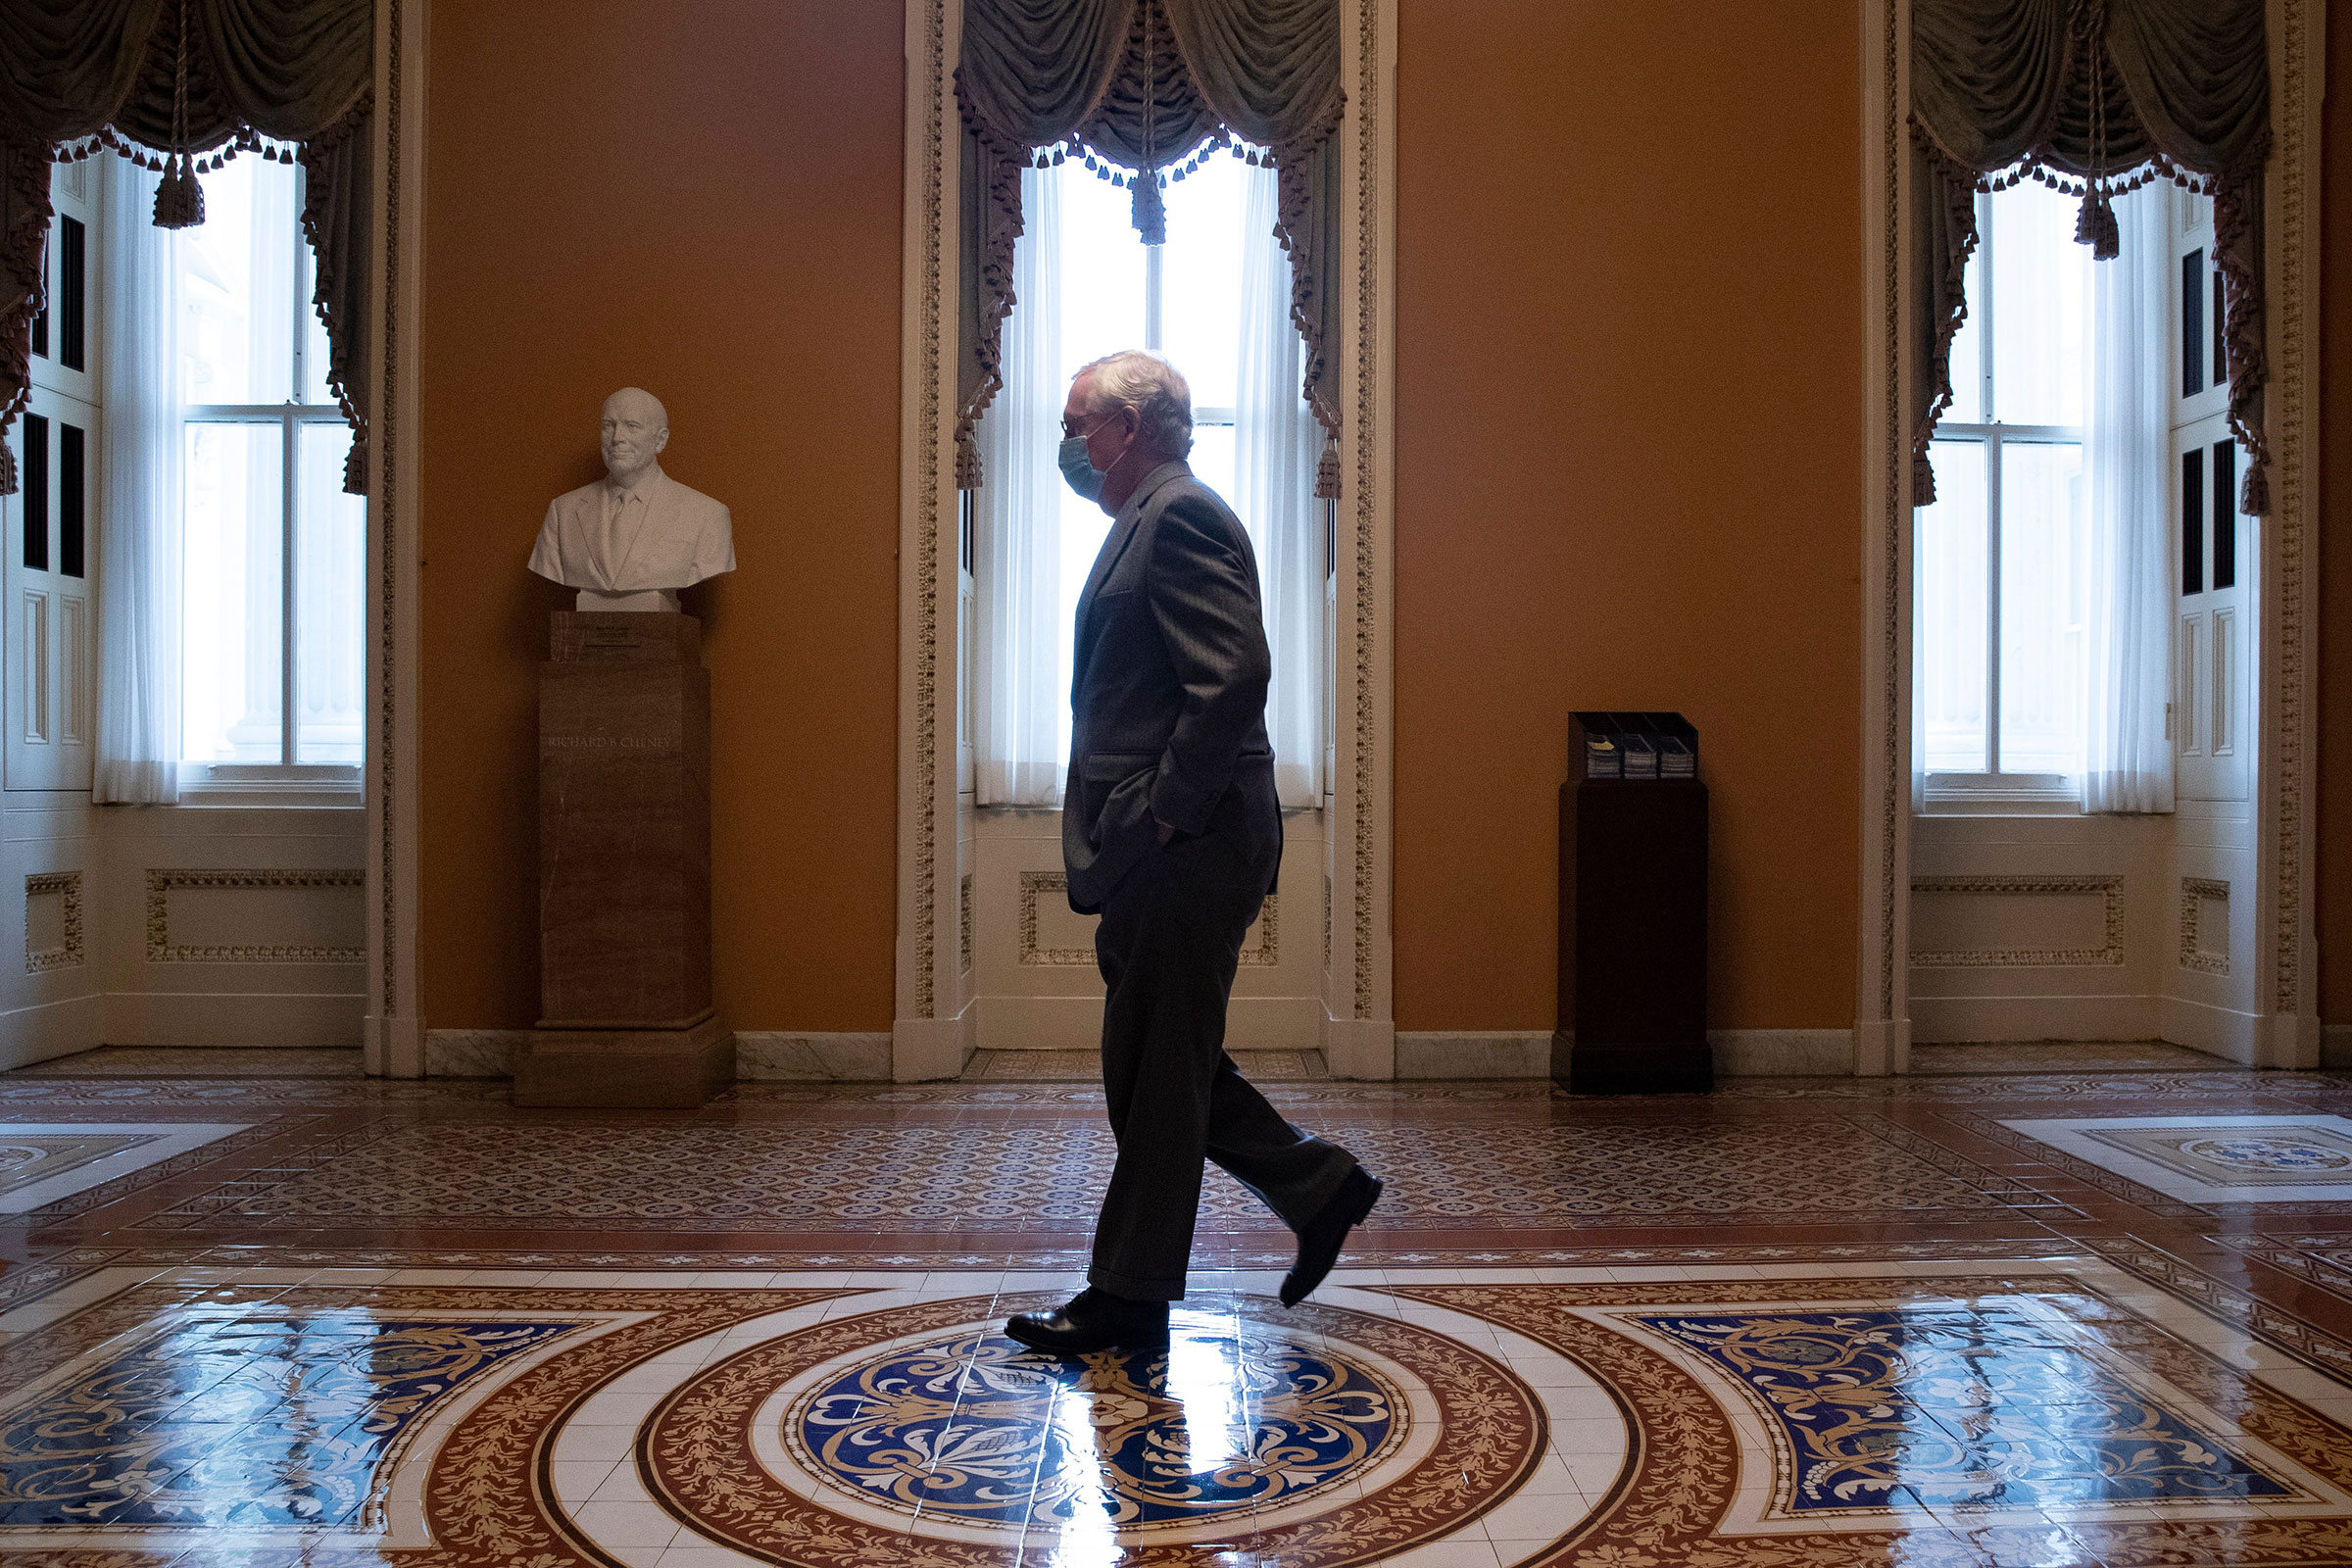 Senate Minority Leader Mitch McConnell walks from the Senate floor to his office on Capitol Hill in Washington, on March 25, 2021. (Michael Reynolds—EPA-EFE/Shutterstock)